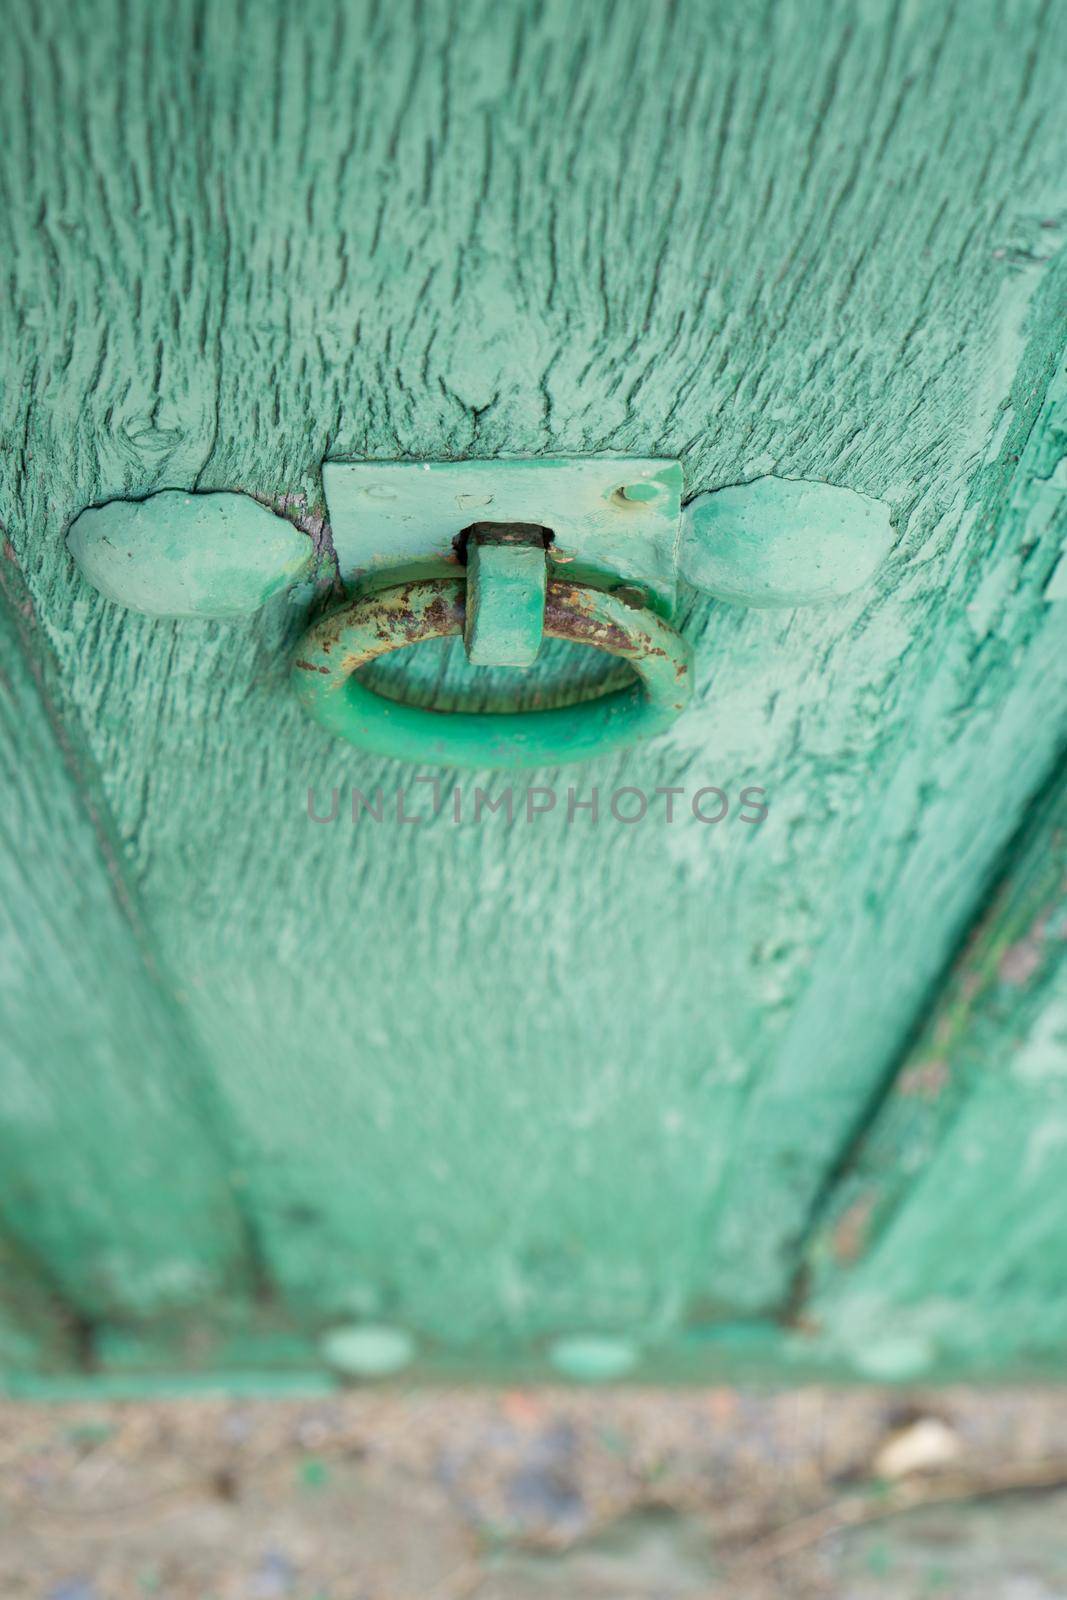 Painted wooden door and iron nails in perspective by FerradalFCG